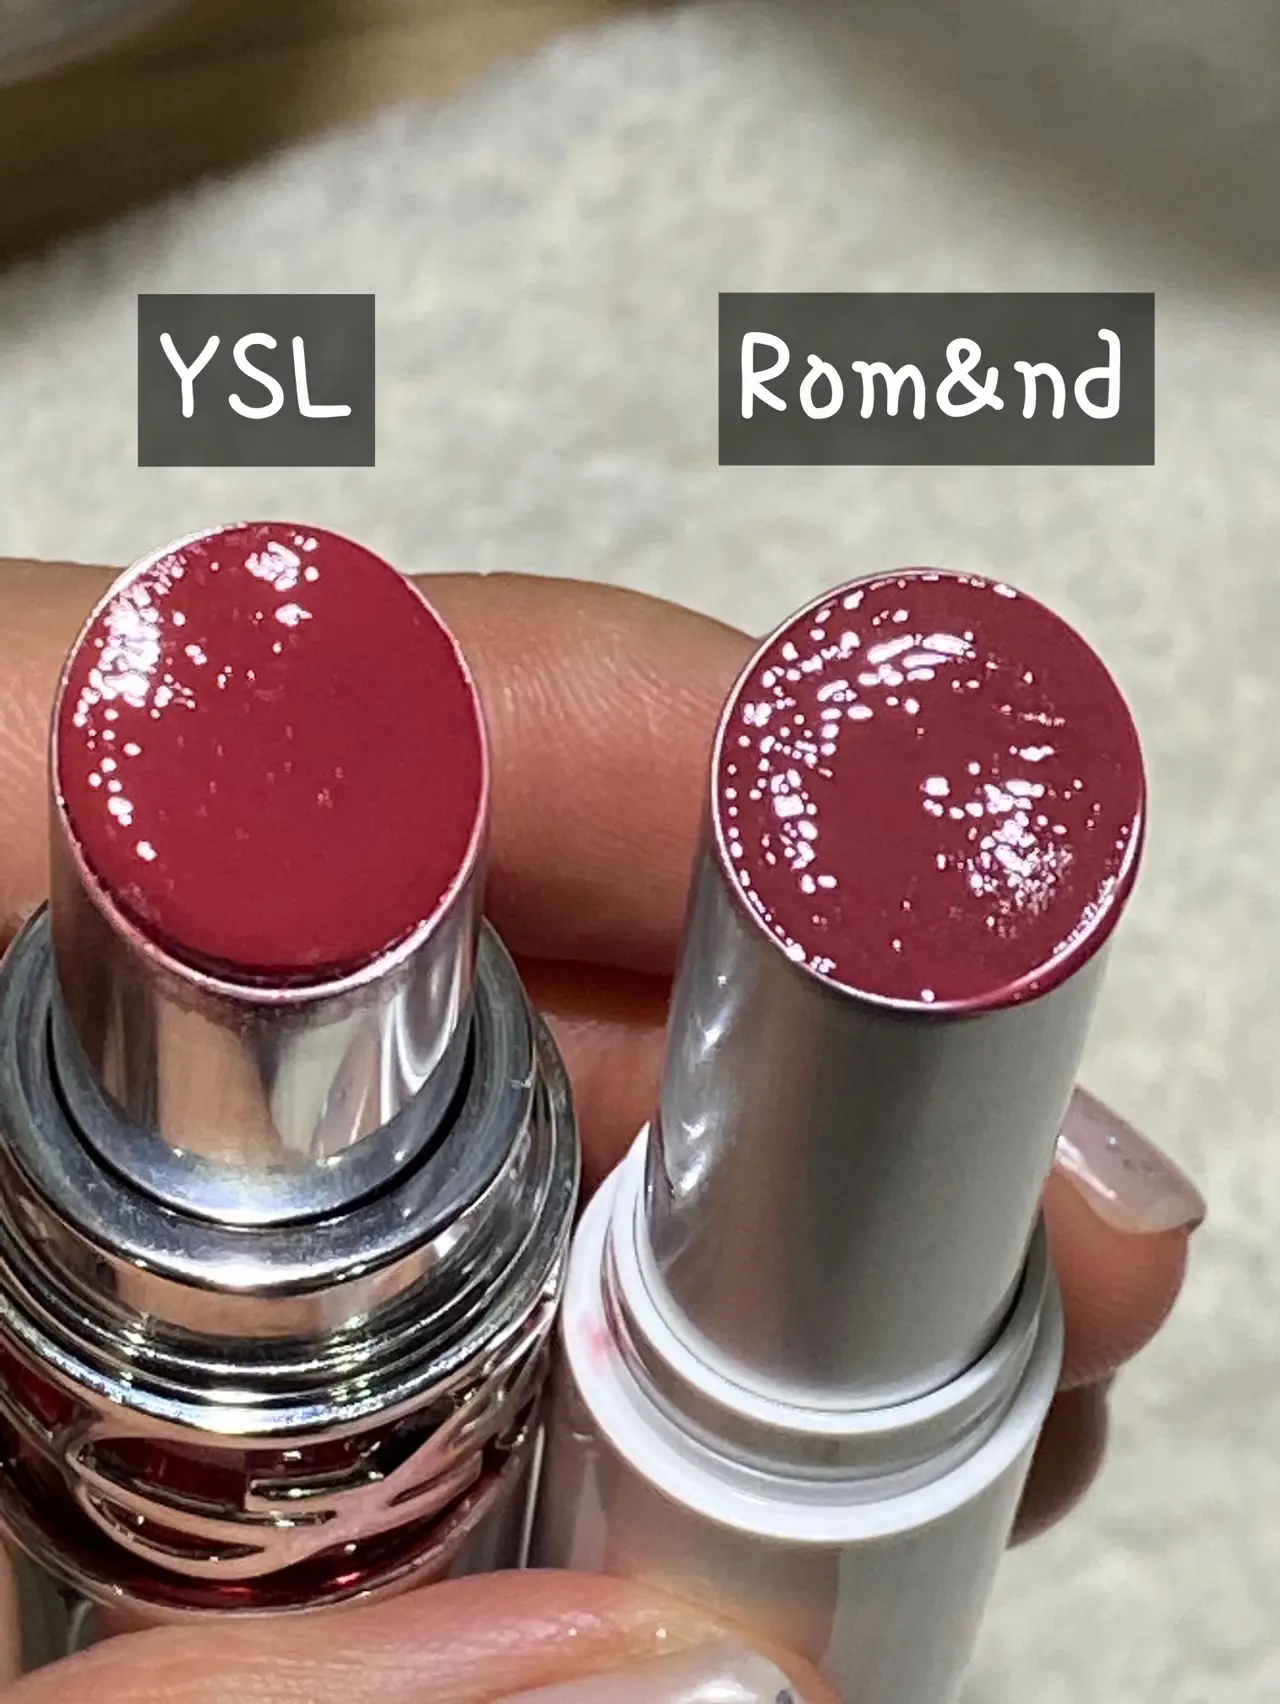 YSL CANDY GLAZE REVIEW - Sugar Love Chic